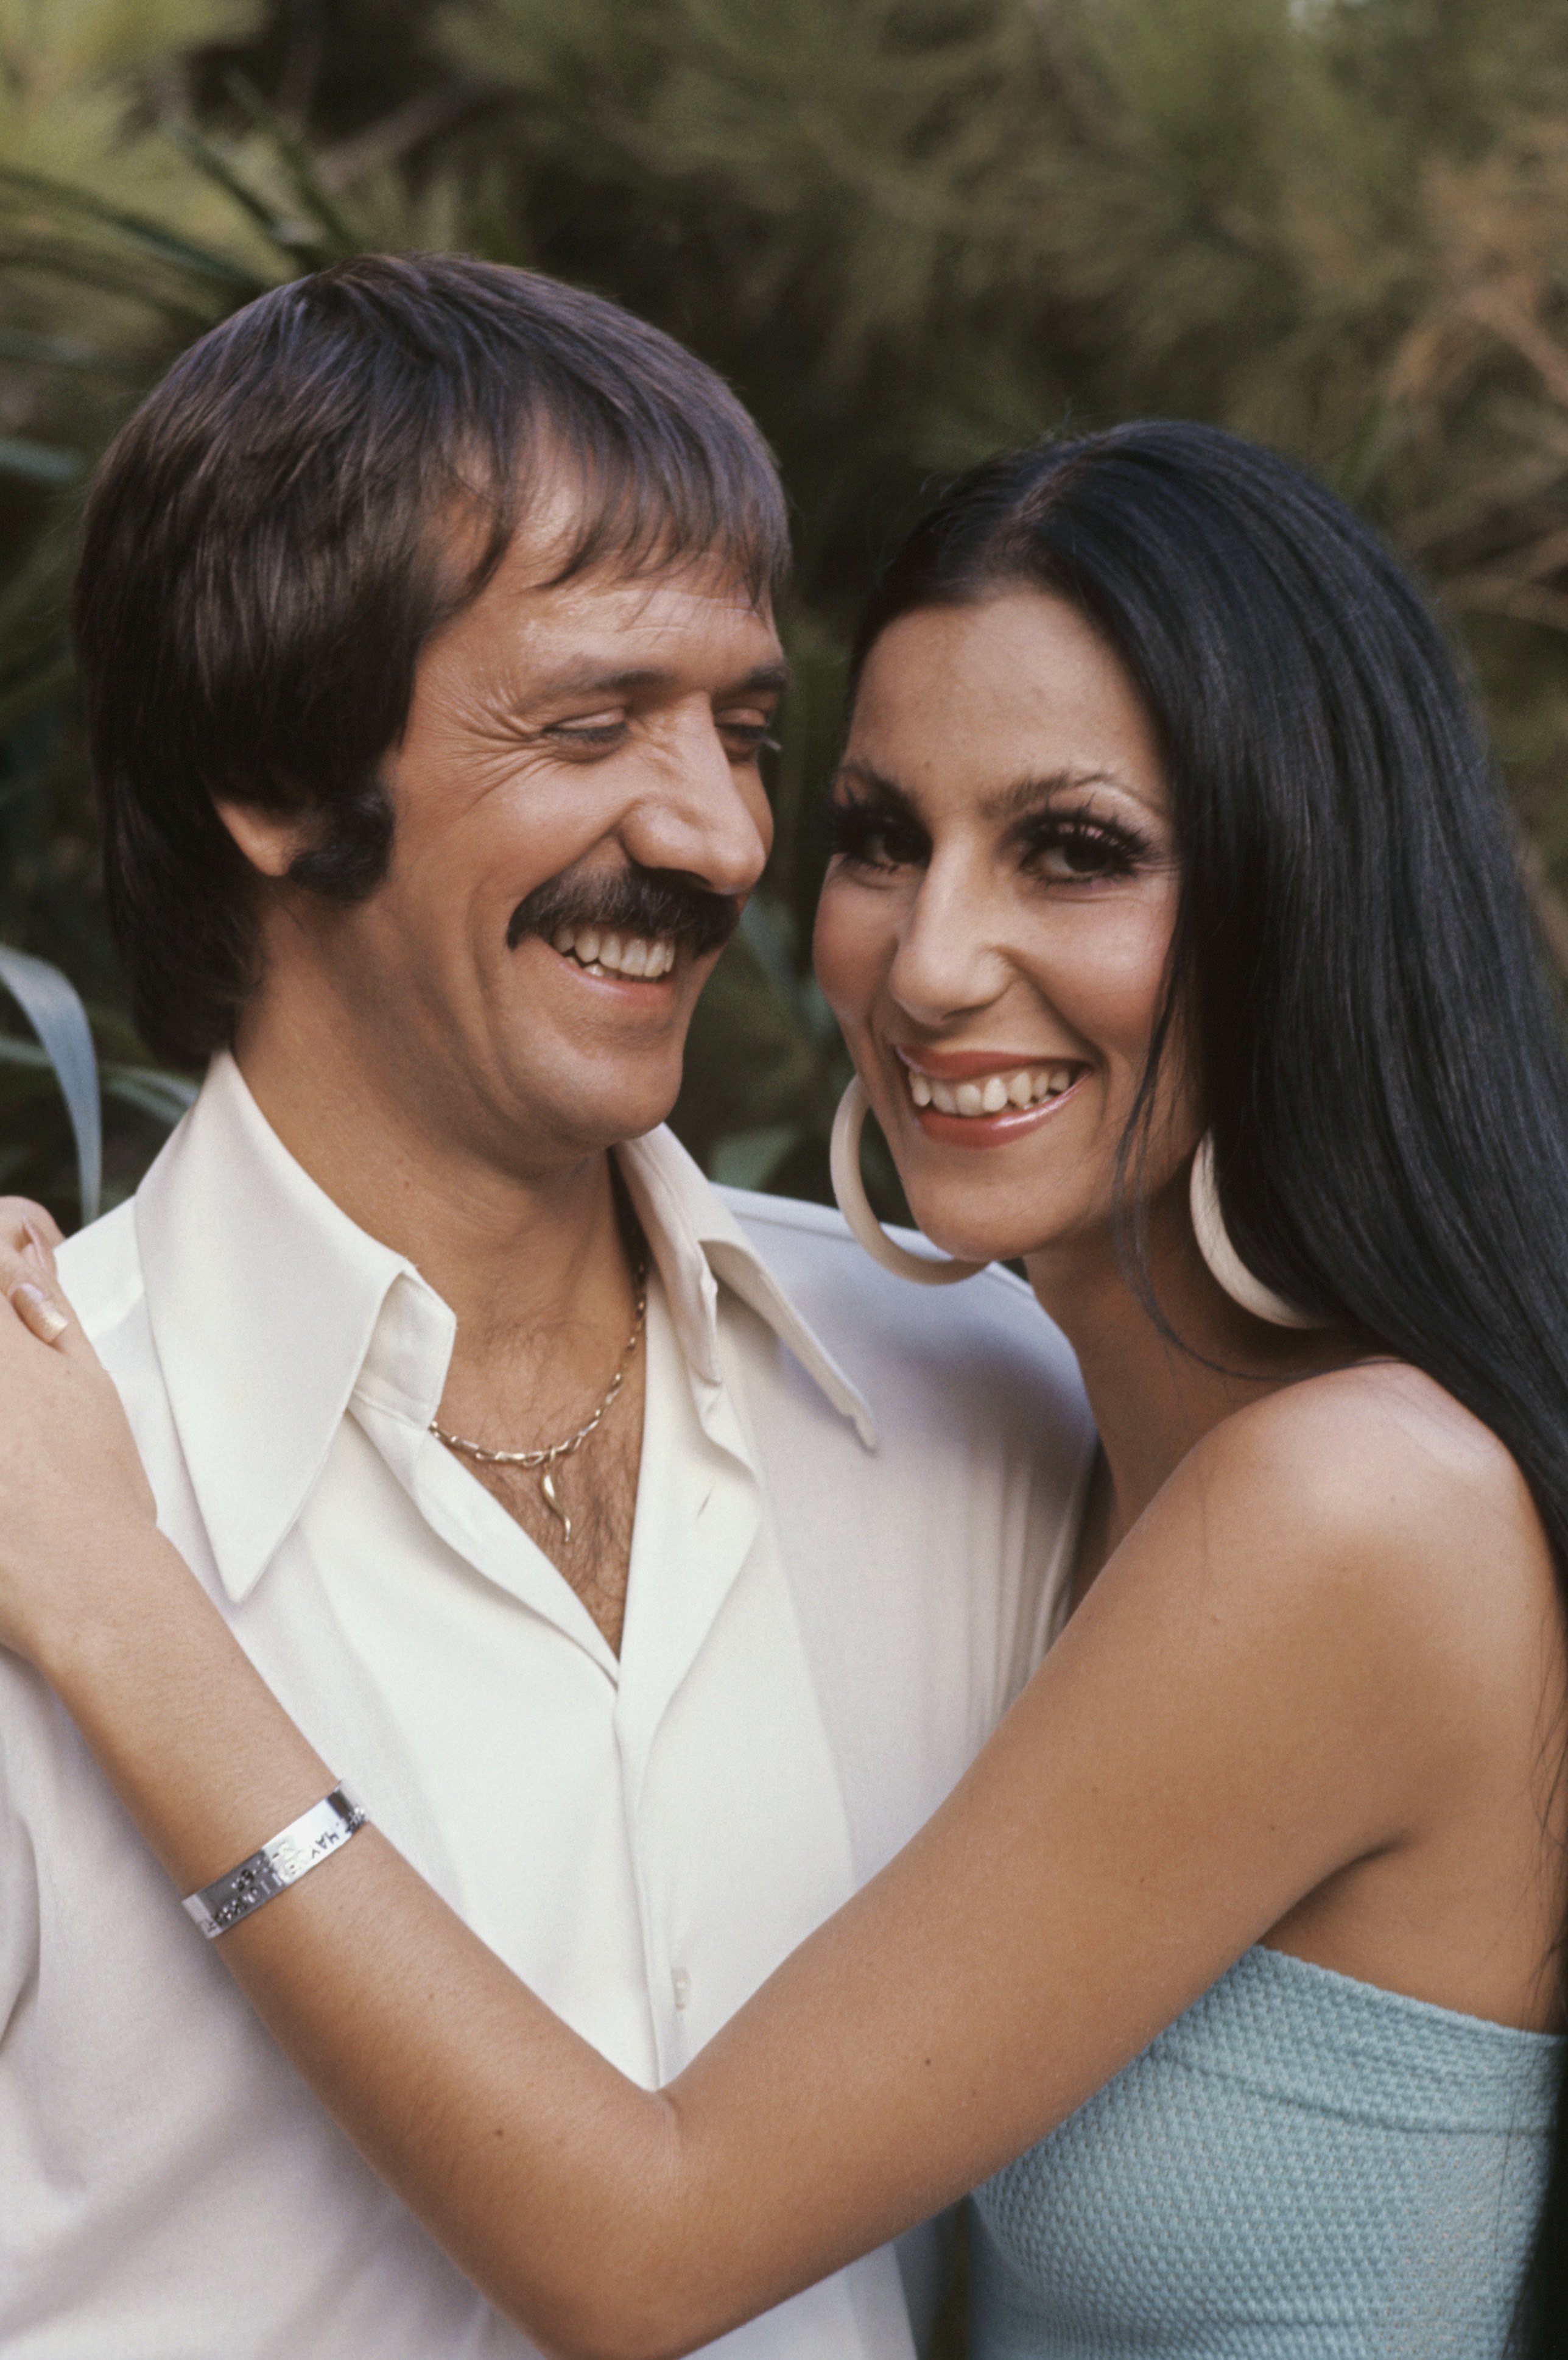 Singers and TV stars Sonny and Cher pose for a portrait at their home in Beverly Hills, California, circa 1970 |  Source: Getty Images